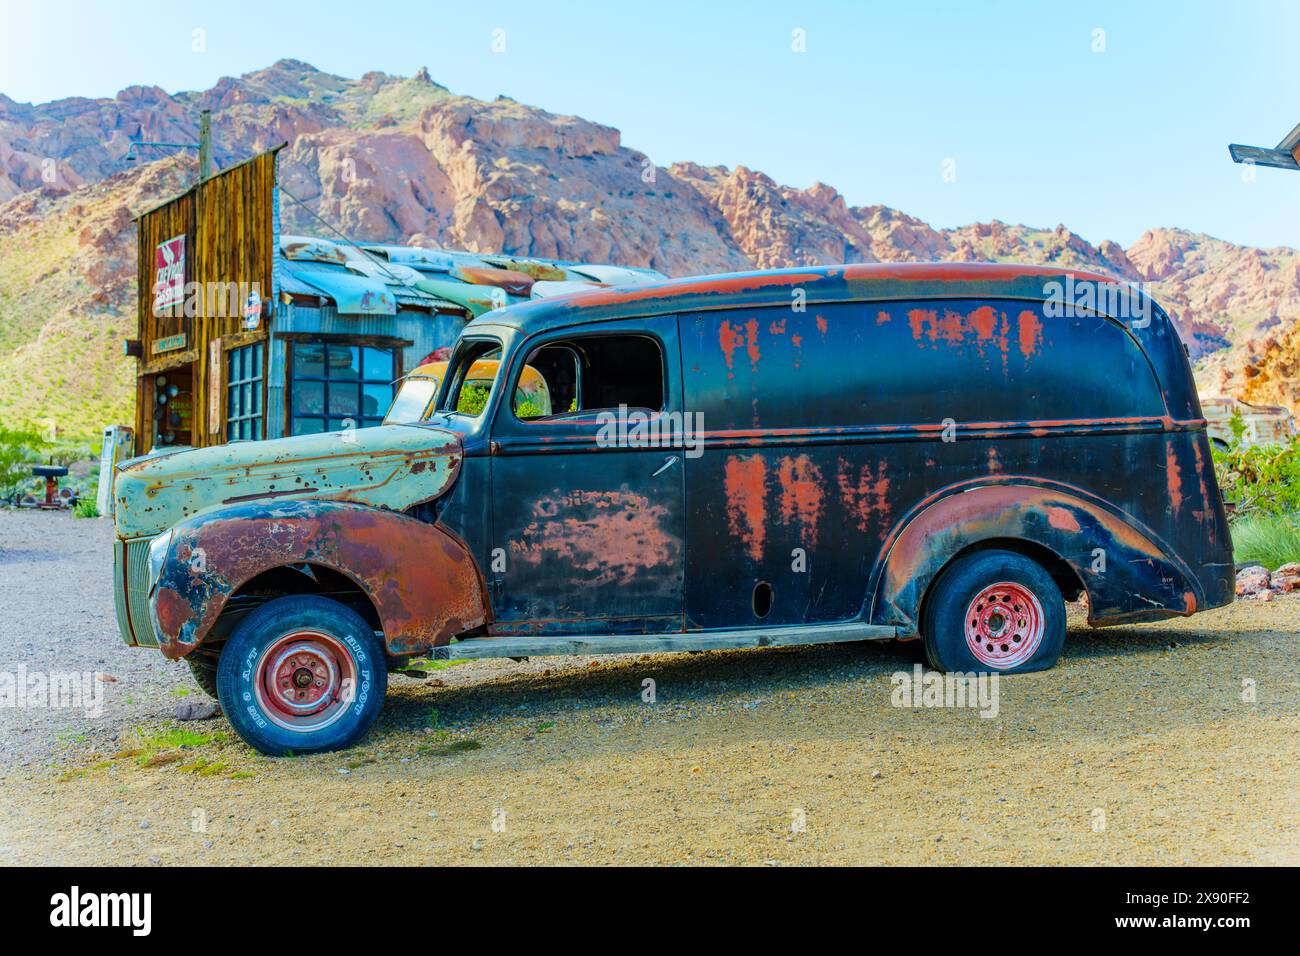 Nelson, Nevada - April 15, 2024: Close-up view of a corroded vintage car with an old body shop and mountains in the background Stock Photo